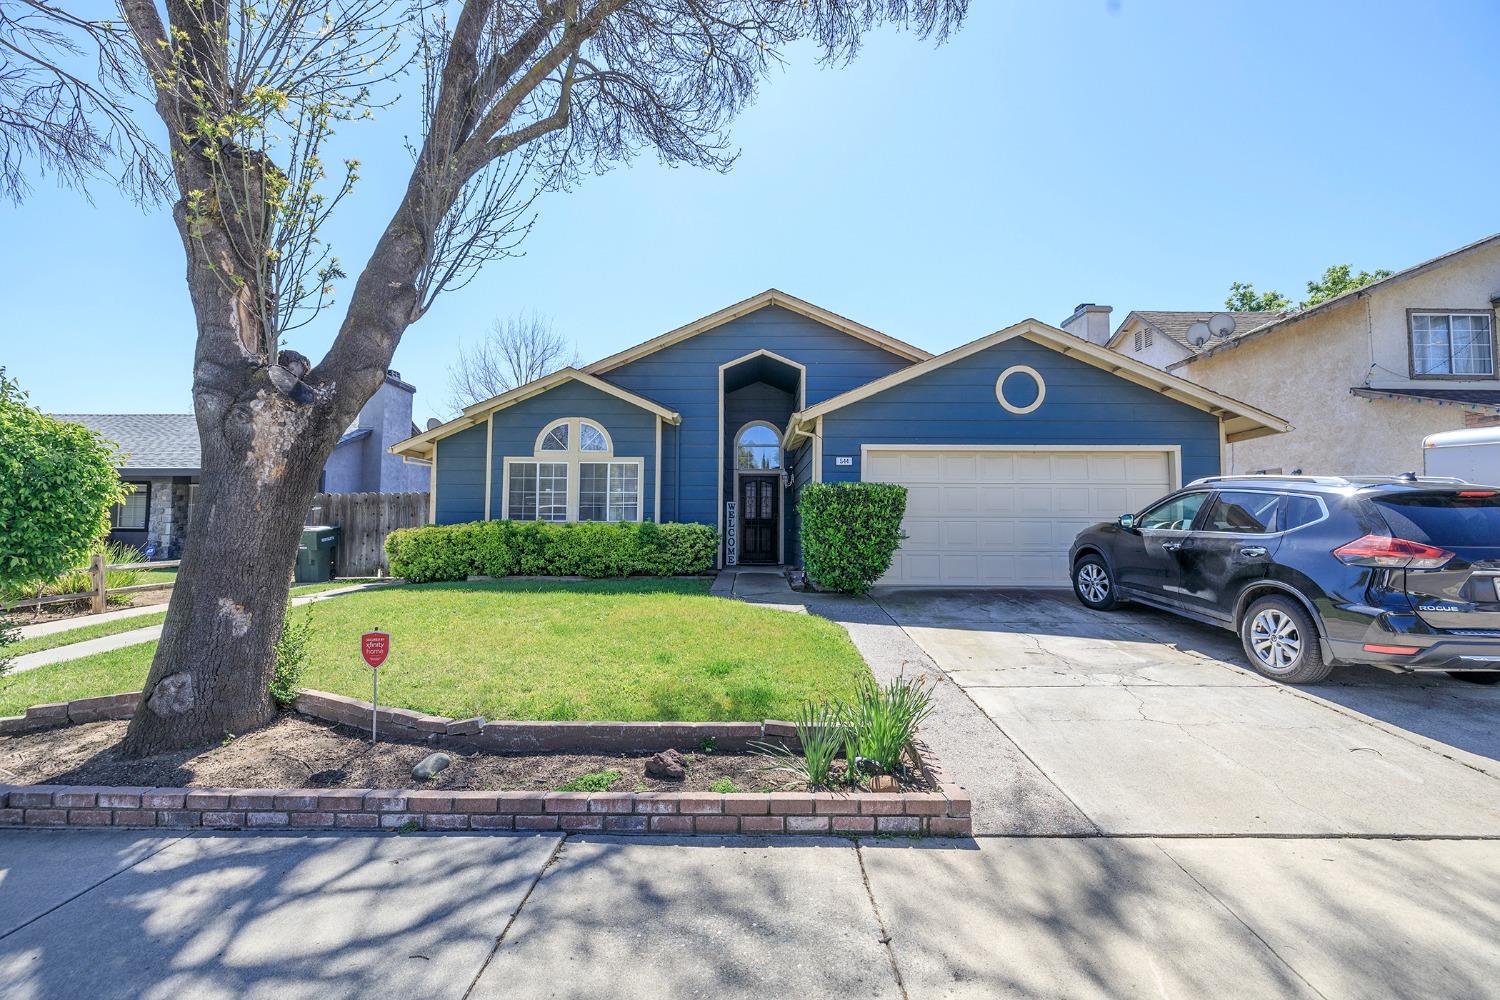 Photo of 544 Westfield Pl in Patterson, CA